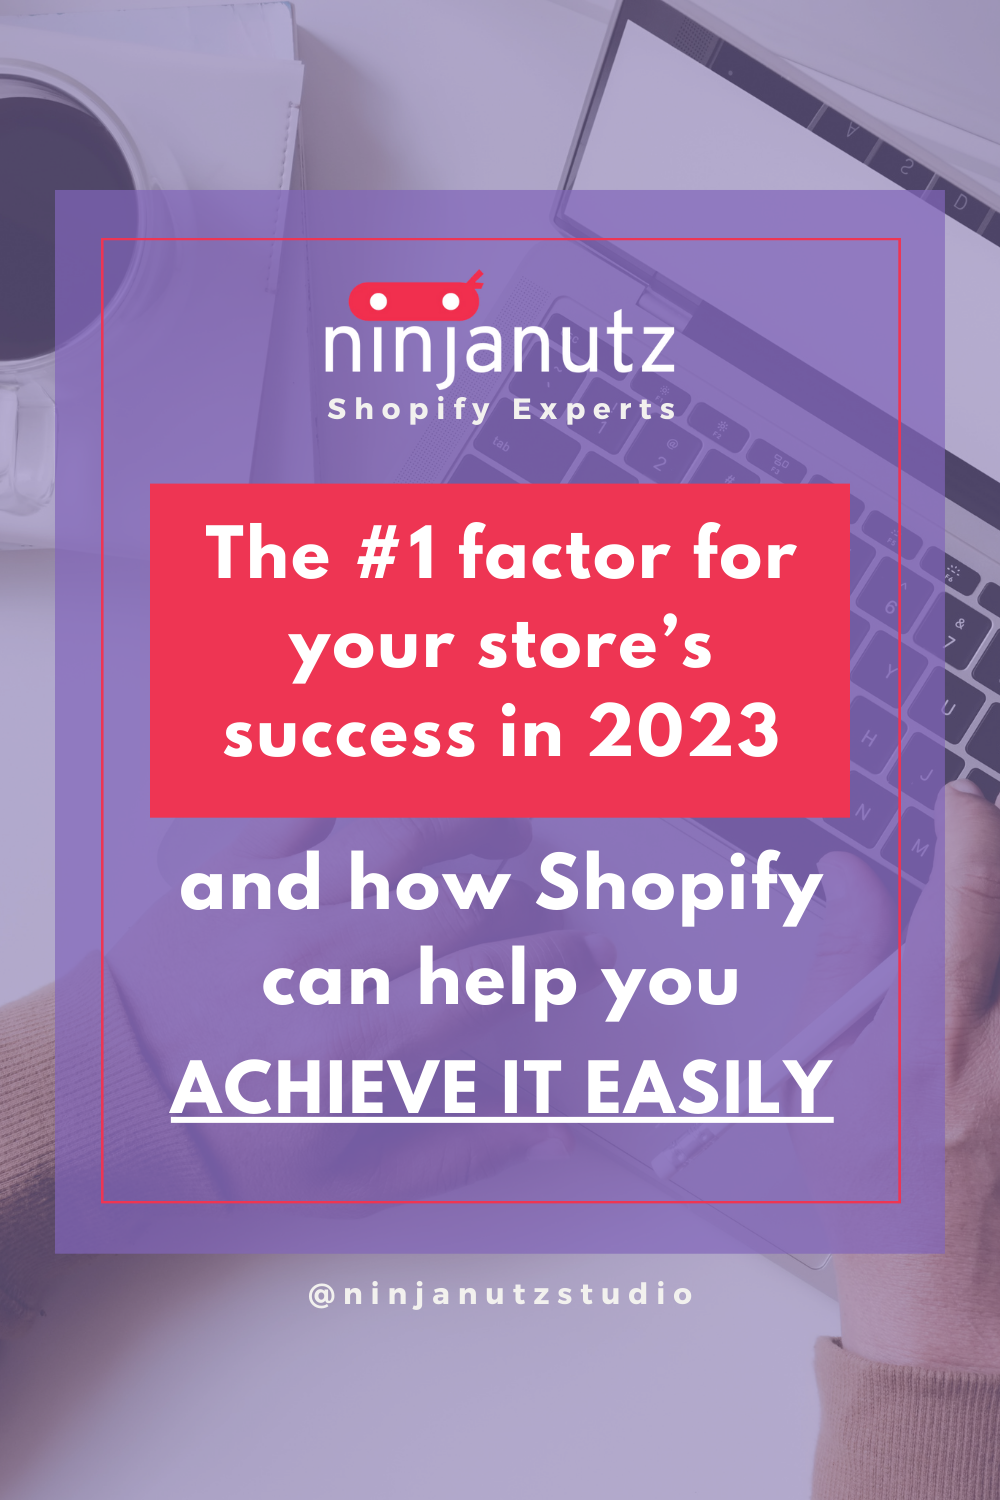 The #1 factor for your store’s success in 2023, and how Shopify can help you achieve it easily NinjaNutz®